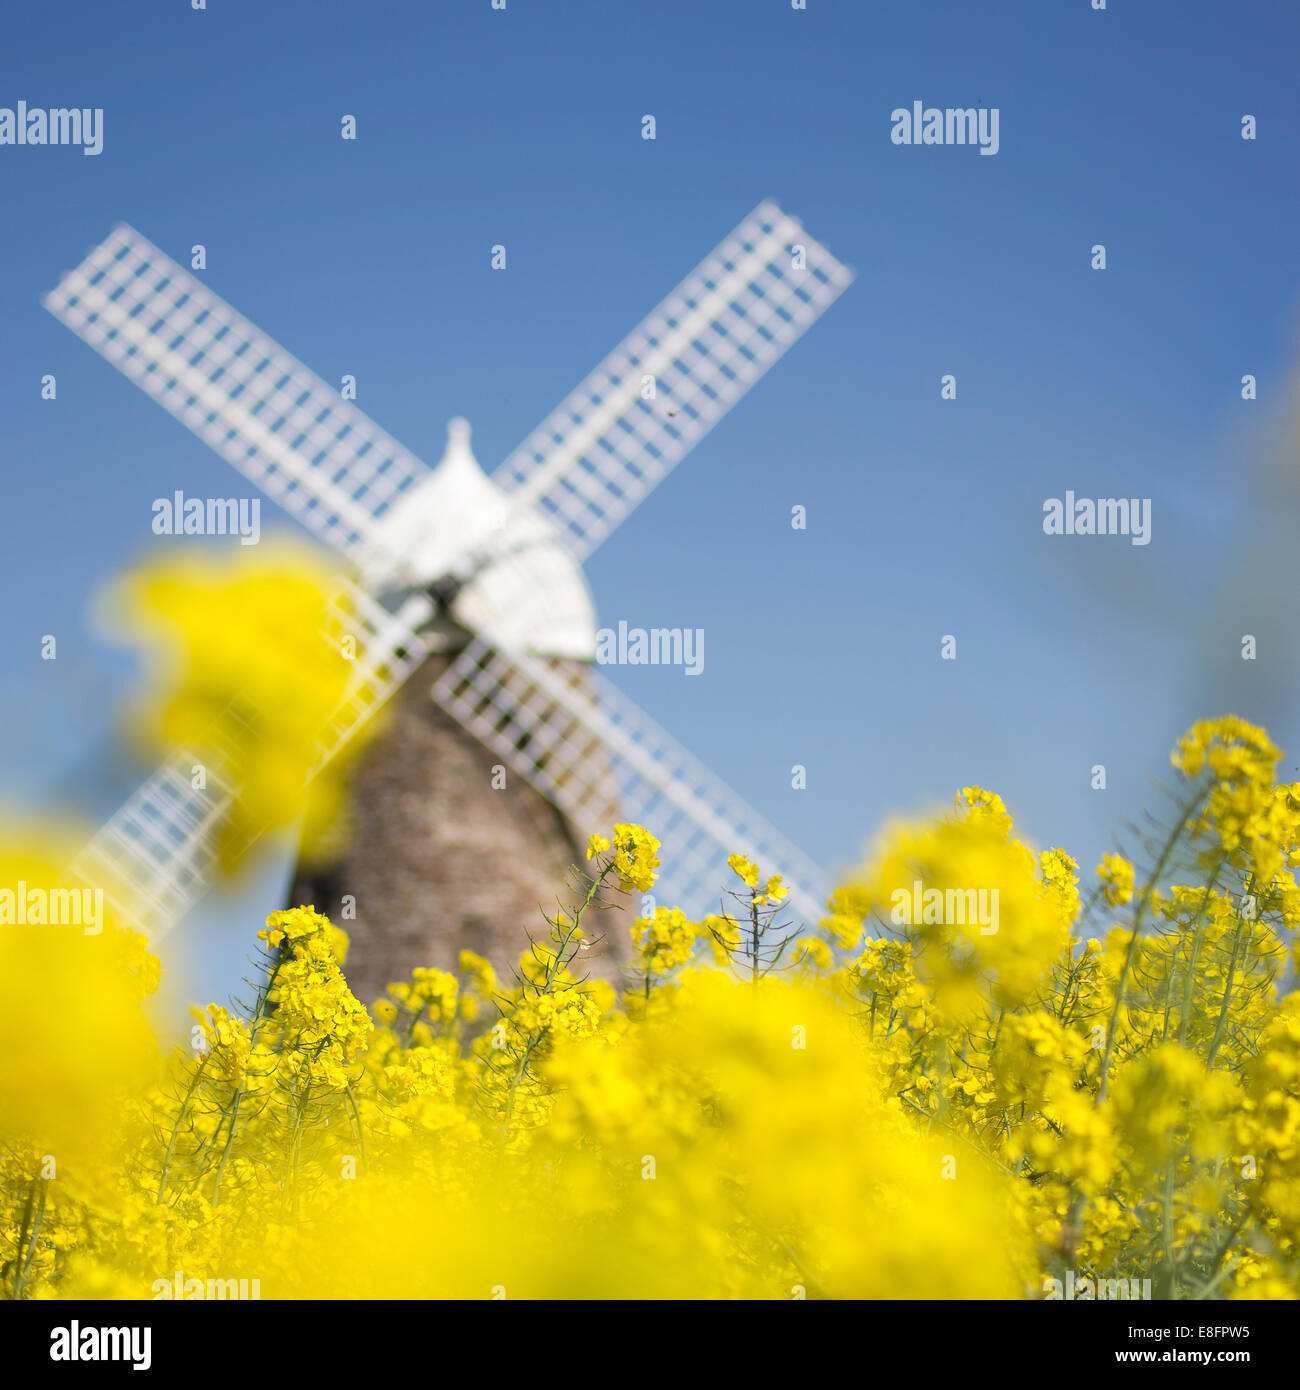 United Kingdom, West Sussex, Halnaker Windmill in field of flowers Stock Photo